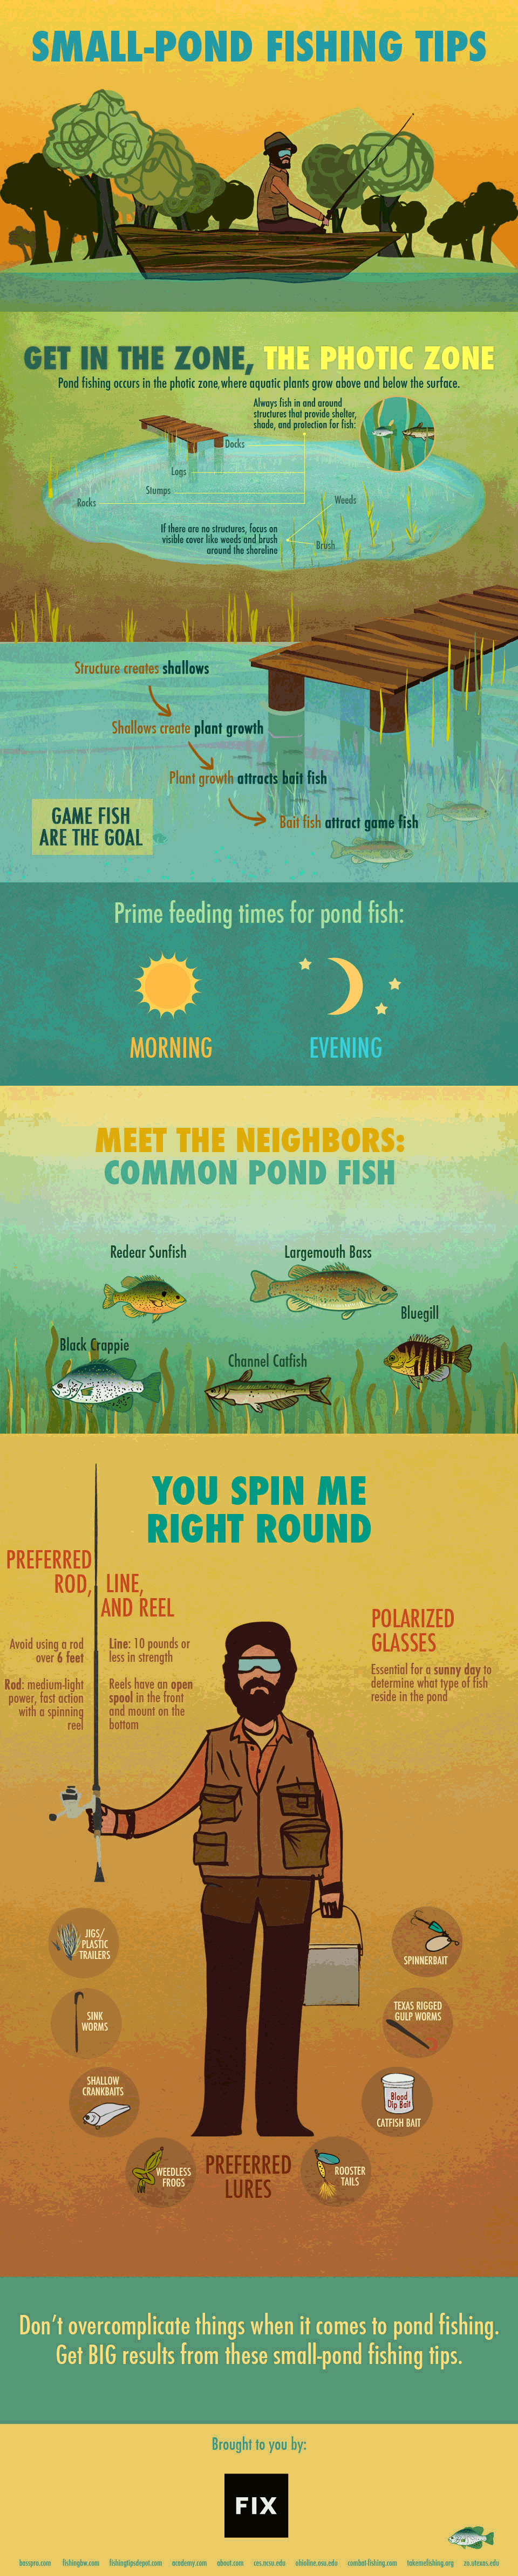 How to Tell If There are Fish in a Pond: Unveil Secrets!